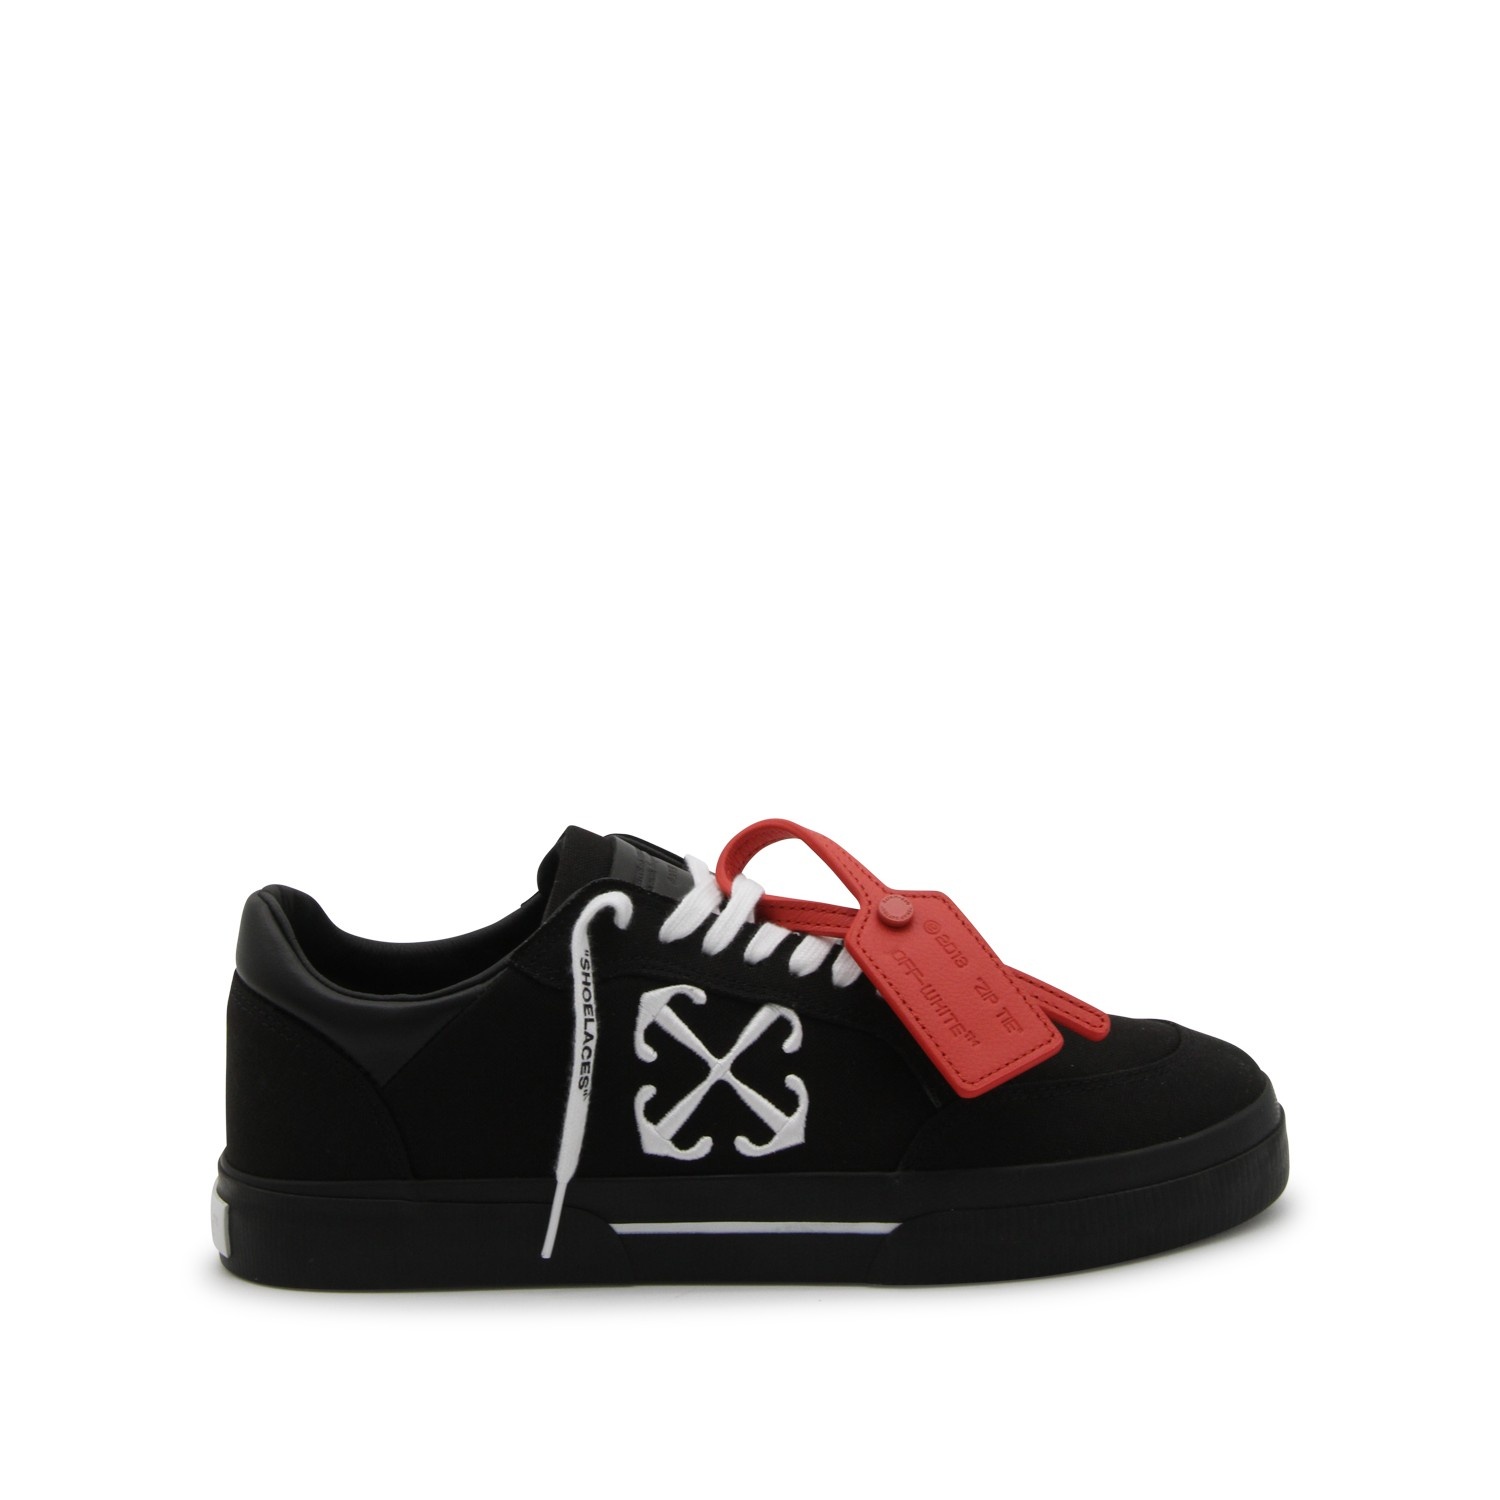 BLACK AND WHITE CANVAS VULCANIZED SNEAKERS - 1